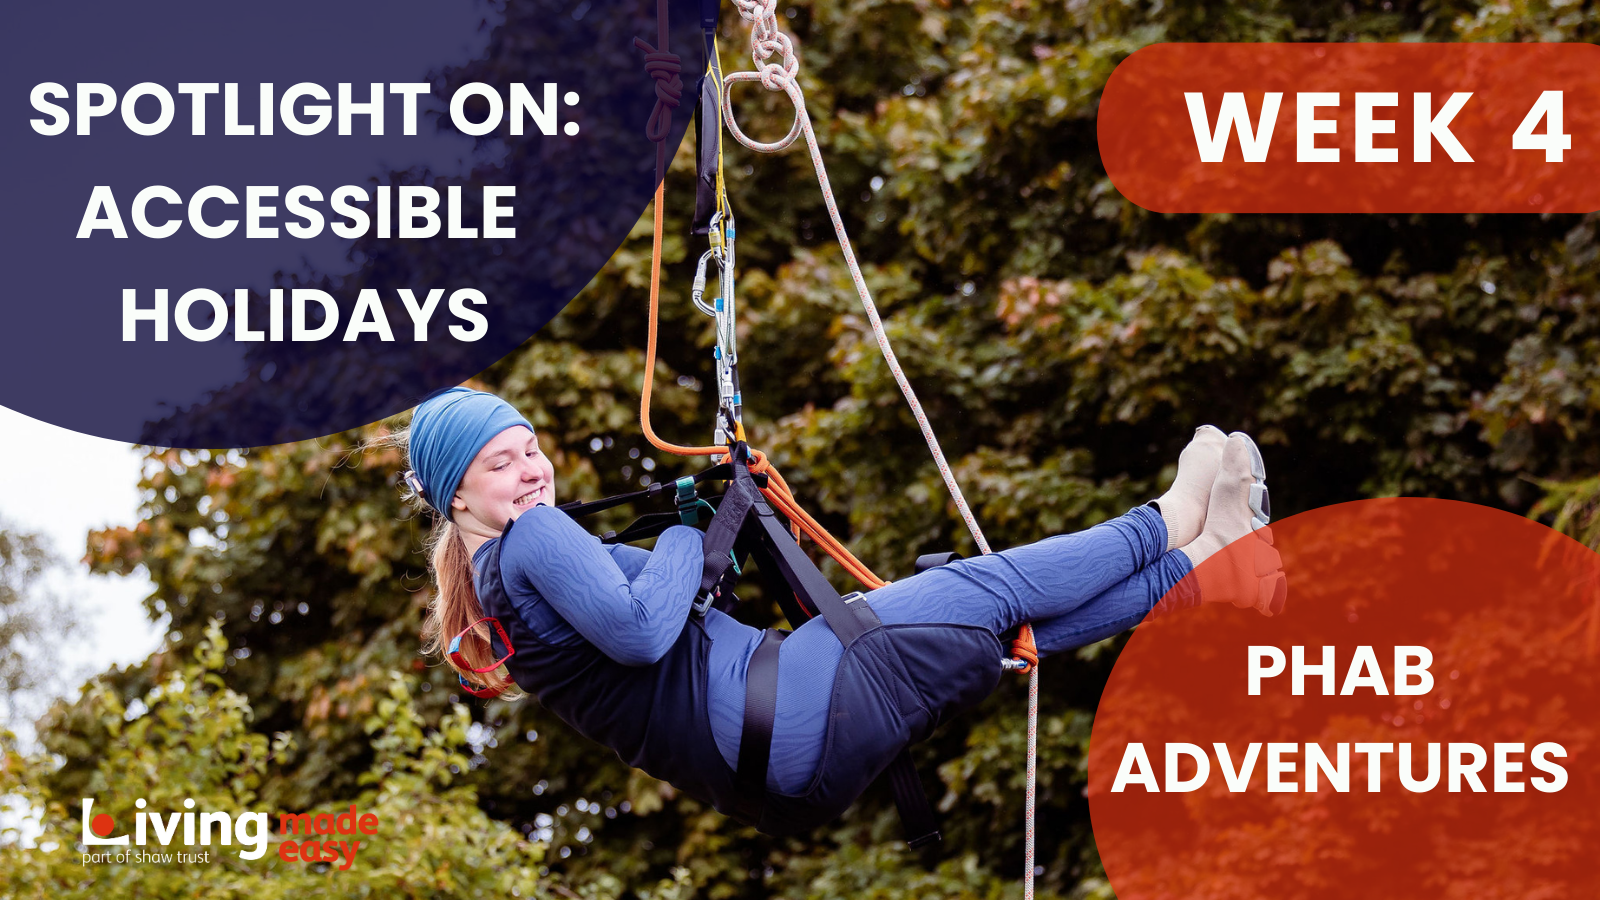 A banner image of a girl wearing a blue headband and blue outfit, smiling whilst enjoying a zip wire ride through the trees, she is secured to the rope by use of a sling. The image reads Spotlight On: Accessible Holidays, Week 4, Phab Adventures